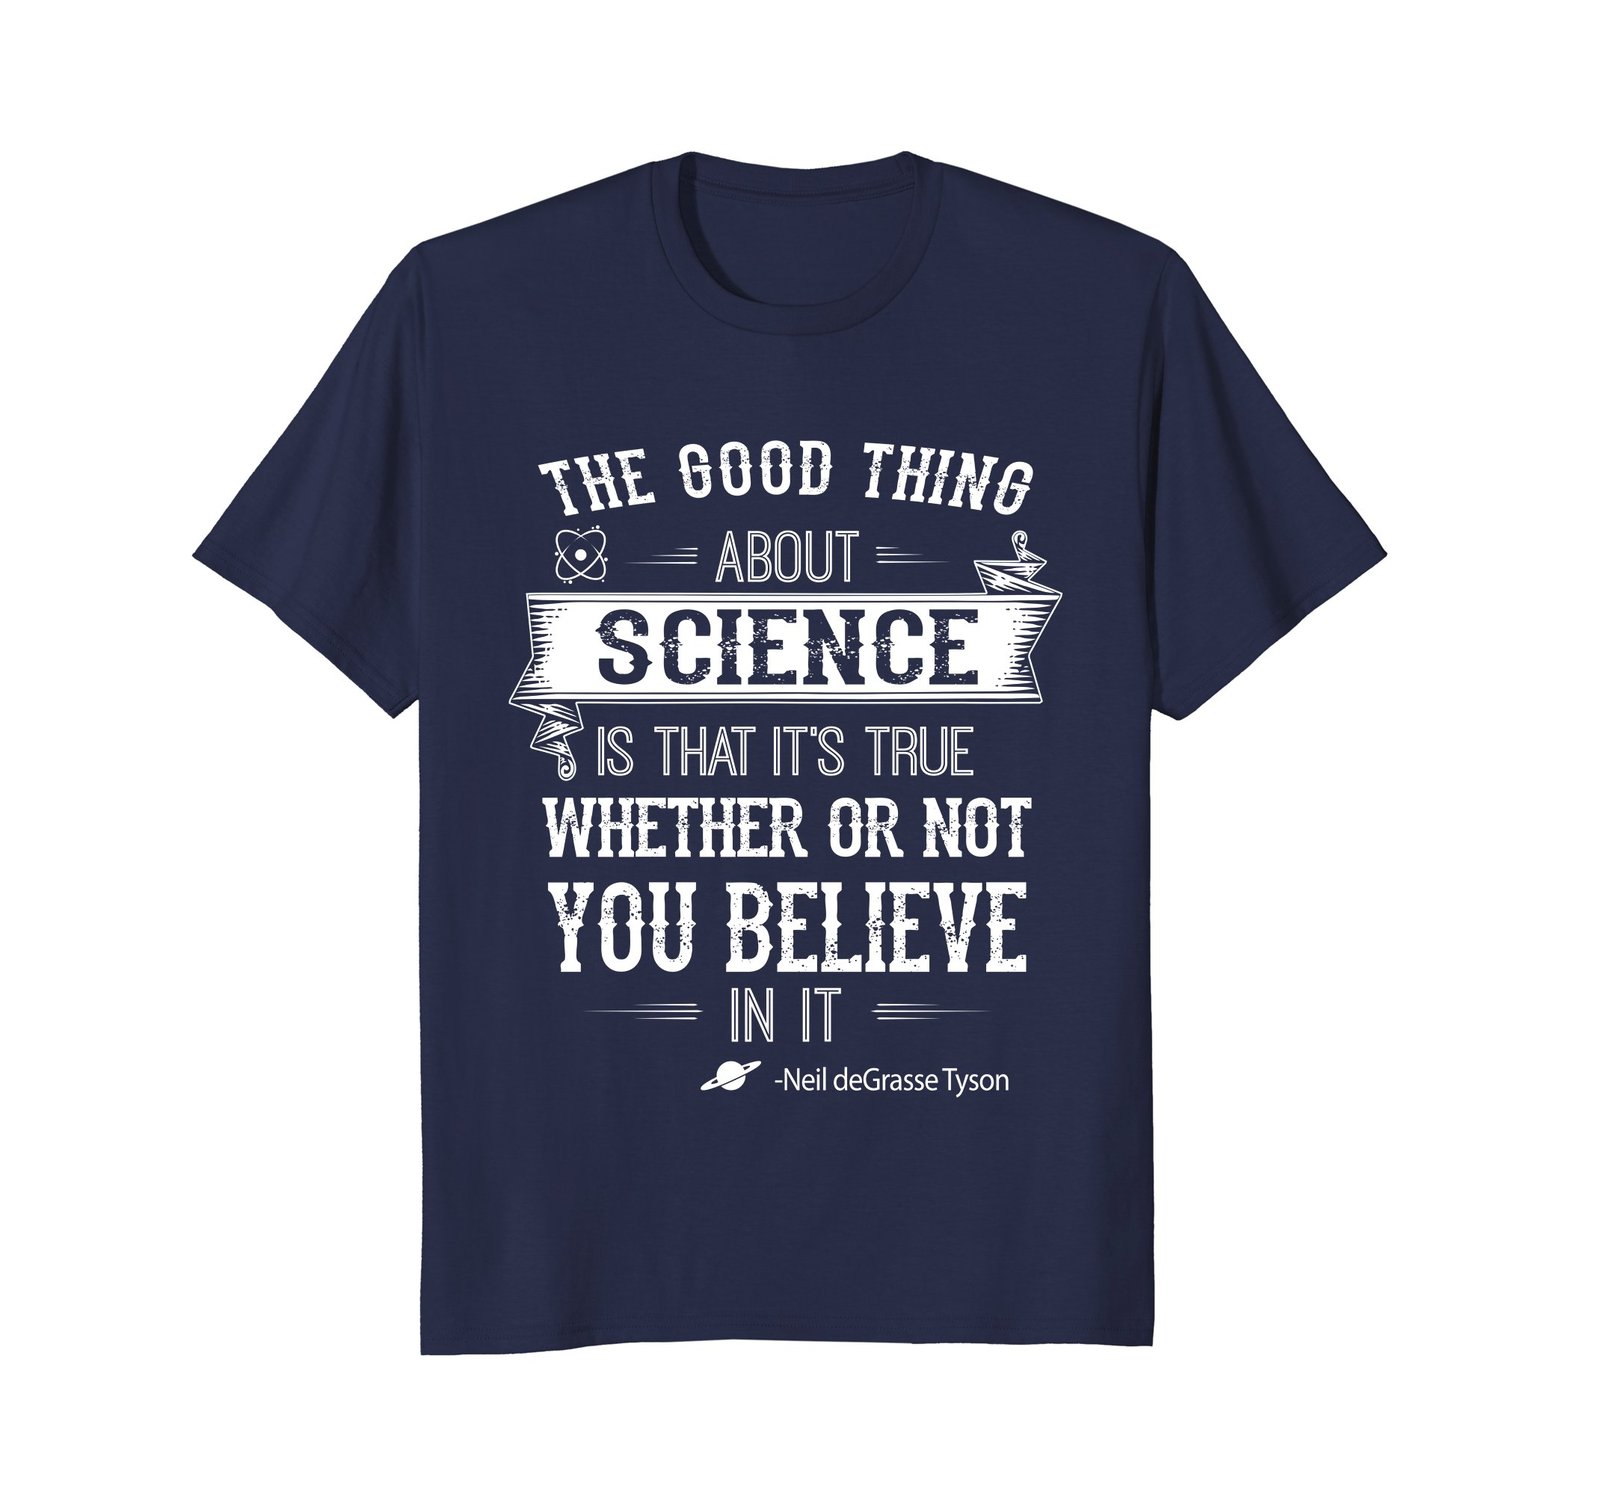 Funny Shirts - The good thing about science is that it's true T-Shirt Men